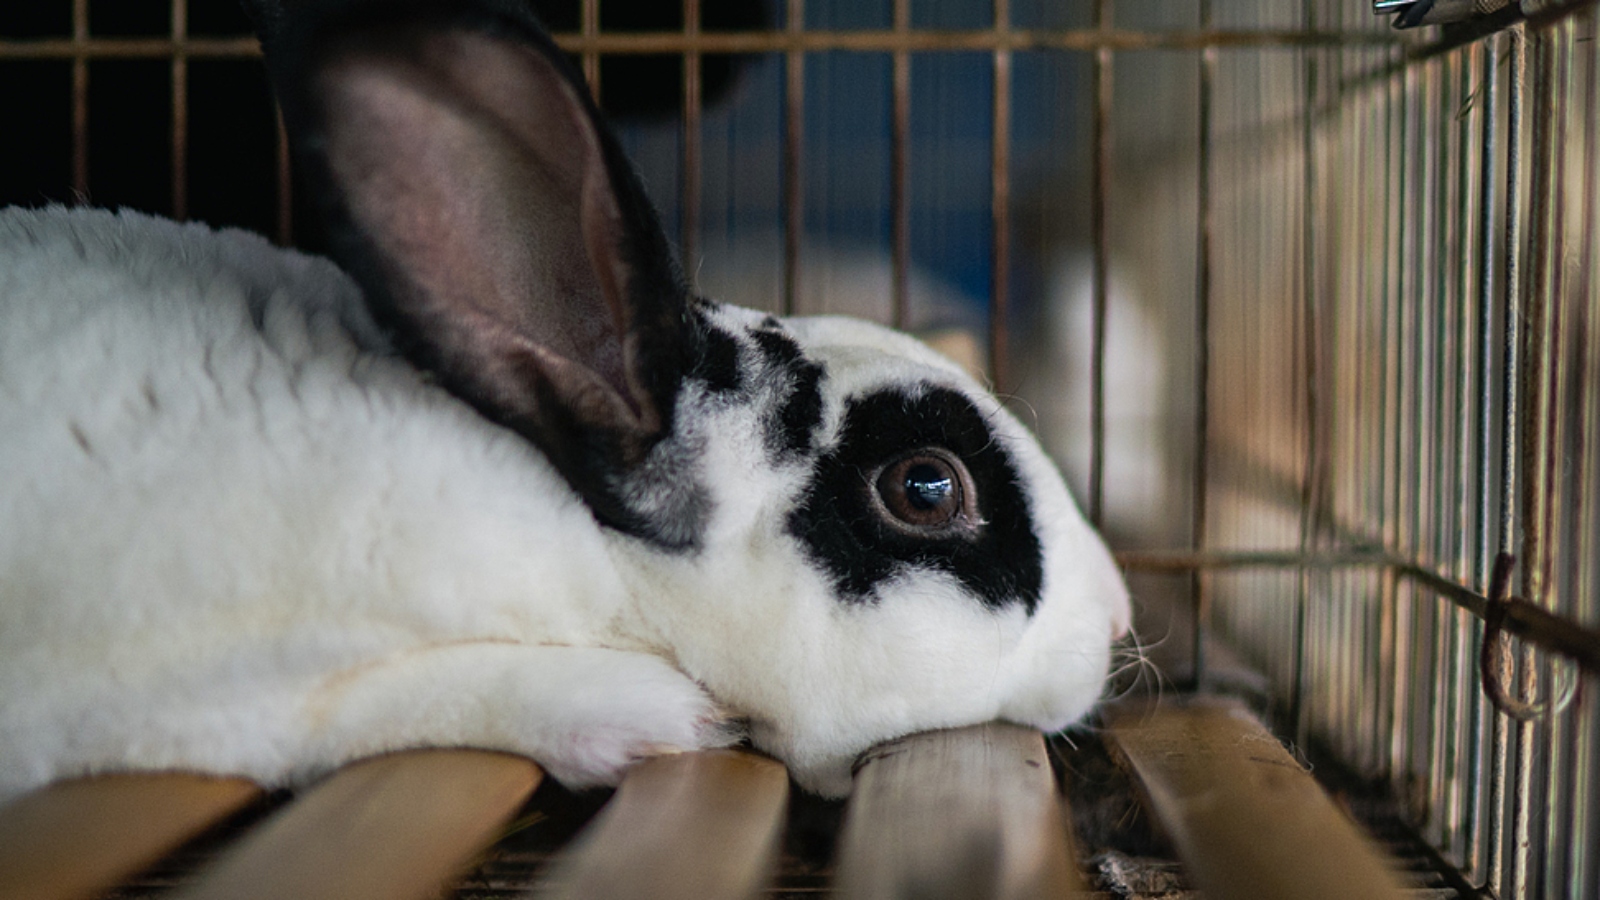 A farmed rabbit in a cage